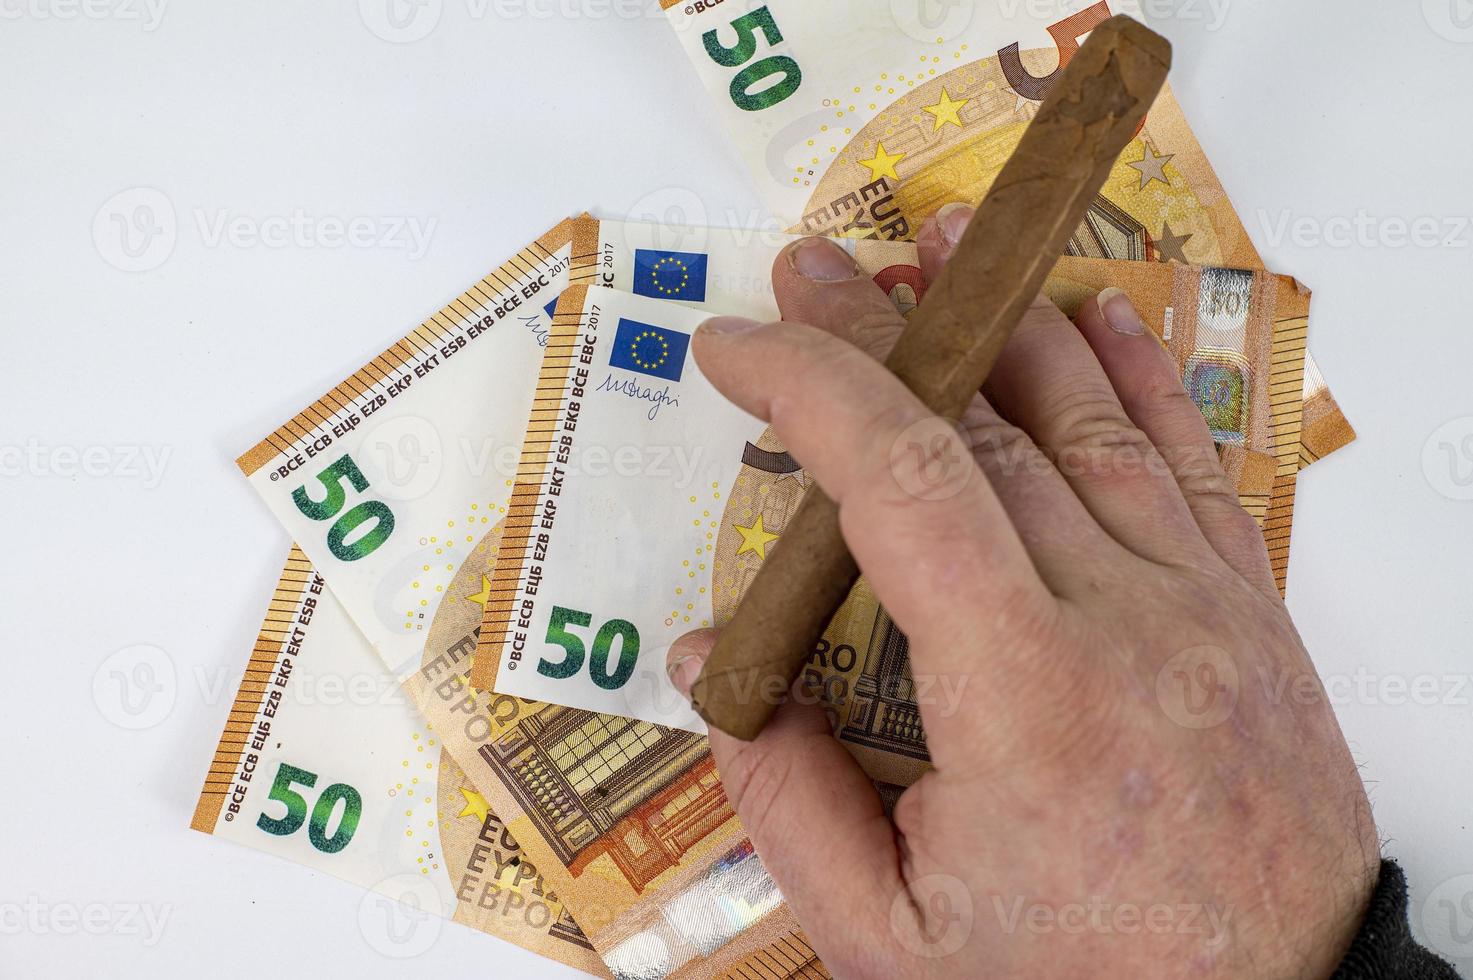 50 euro bills with man's hand holding cigar photo